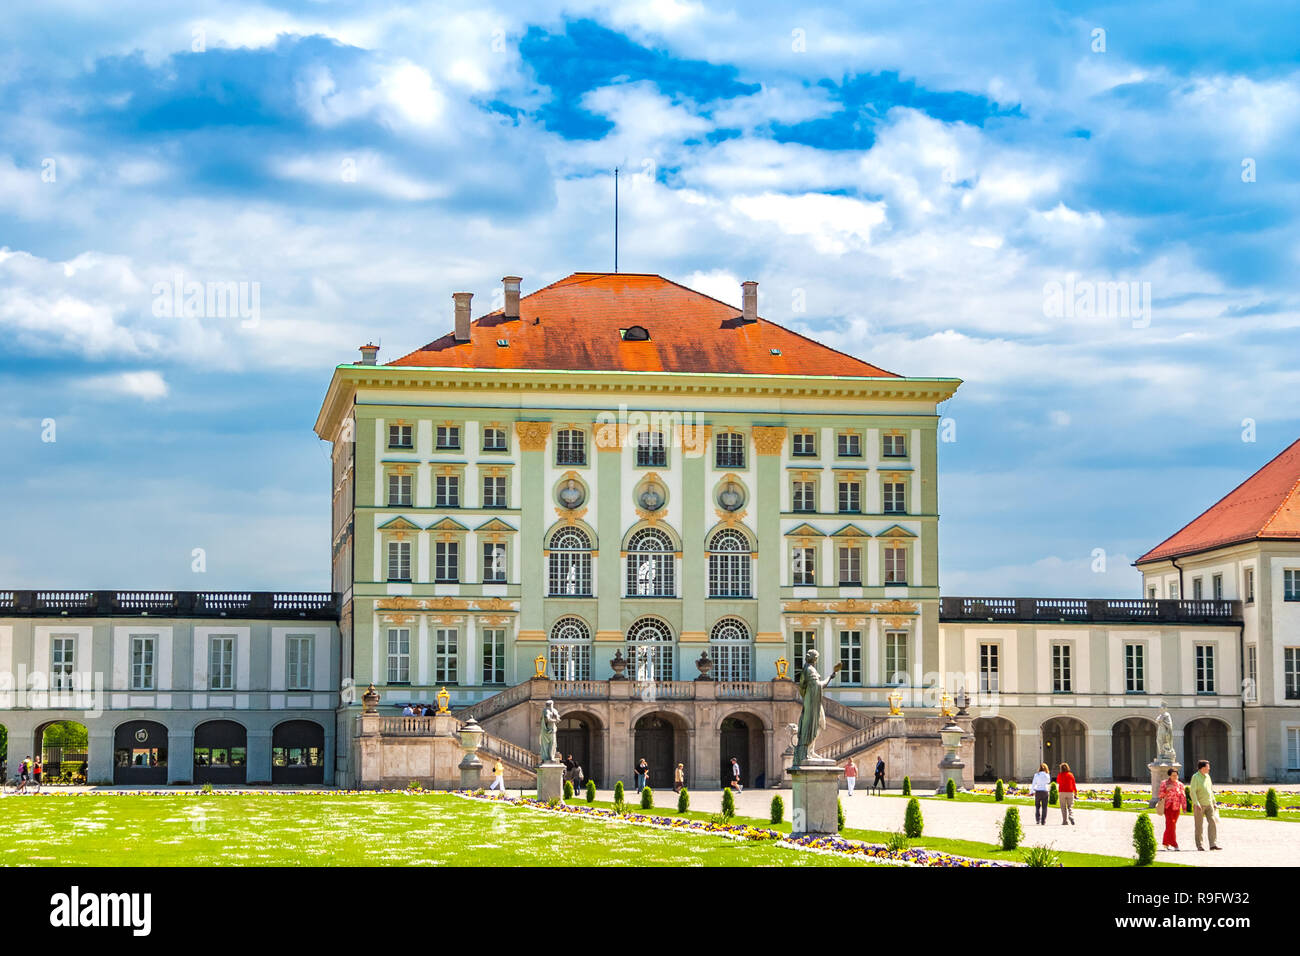 Great back view of the central pavilion of Munich's famous Nymphenburg Palace. Visitors enjoy a stroll in the Grand Parterre of the baroque palace. Stock Photo